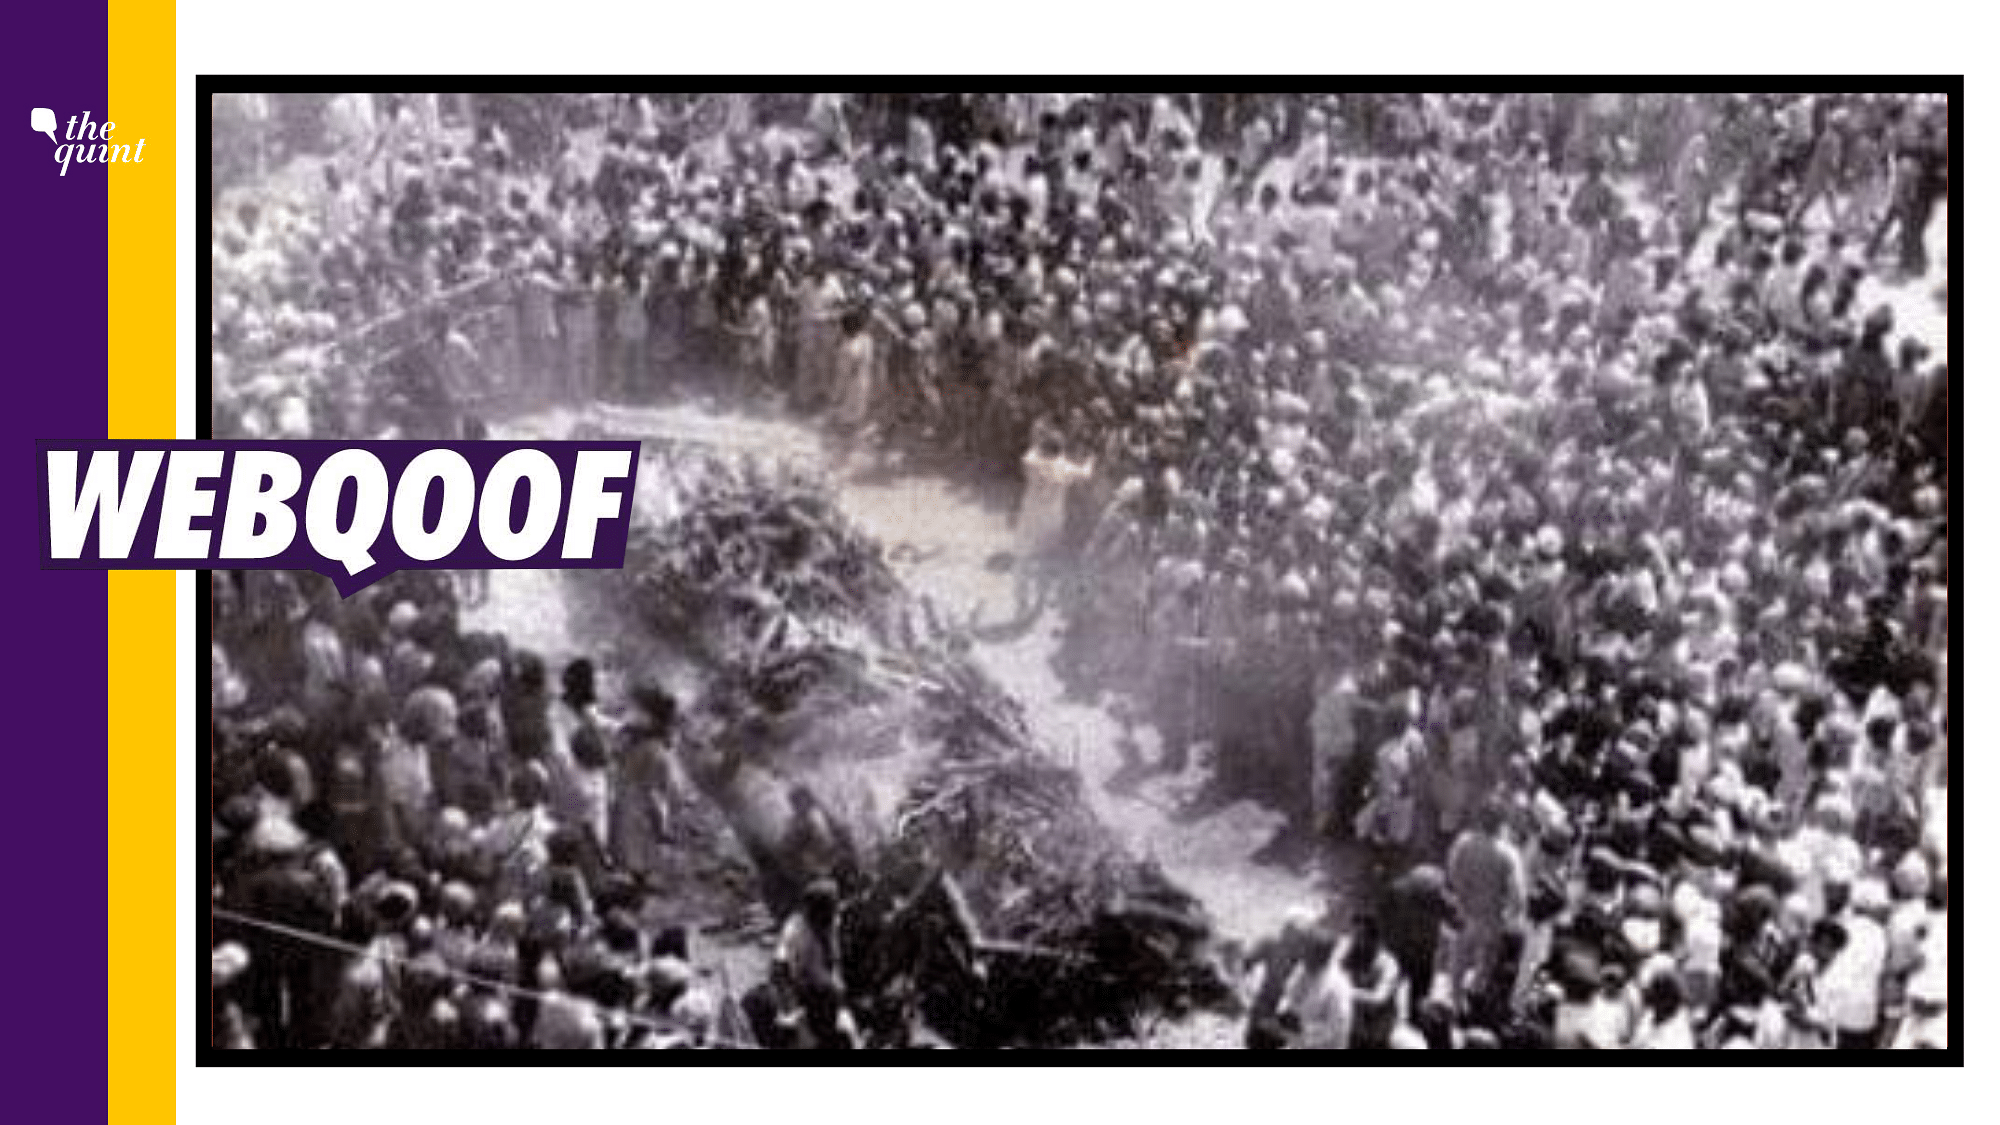 Fact-Check | The viral photograph didn’t show the funeral of Bhagat Singh. It was a photo of the funeral pyres of 13 Sikhs killed during clashes with Nirankaris in April 1978.